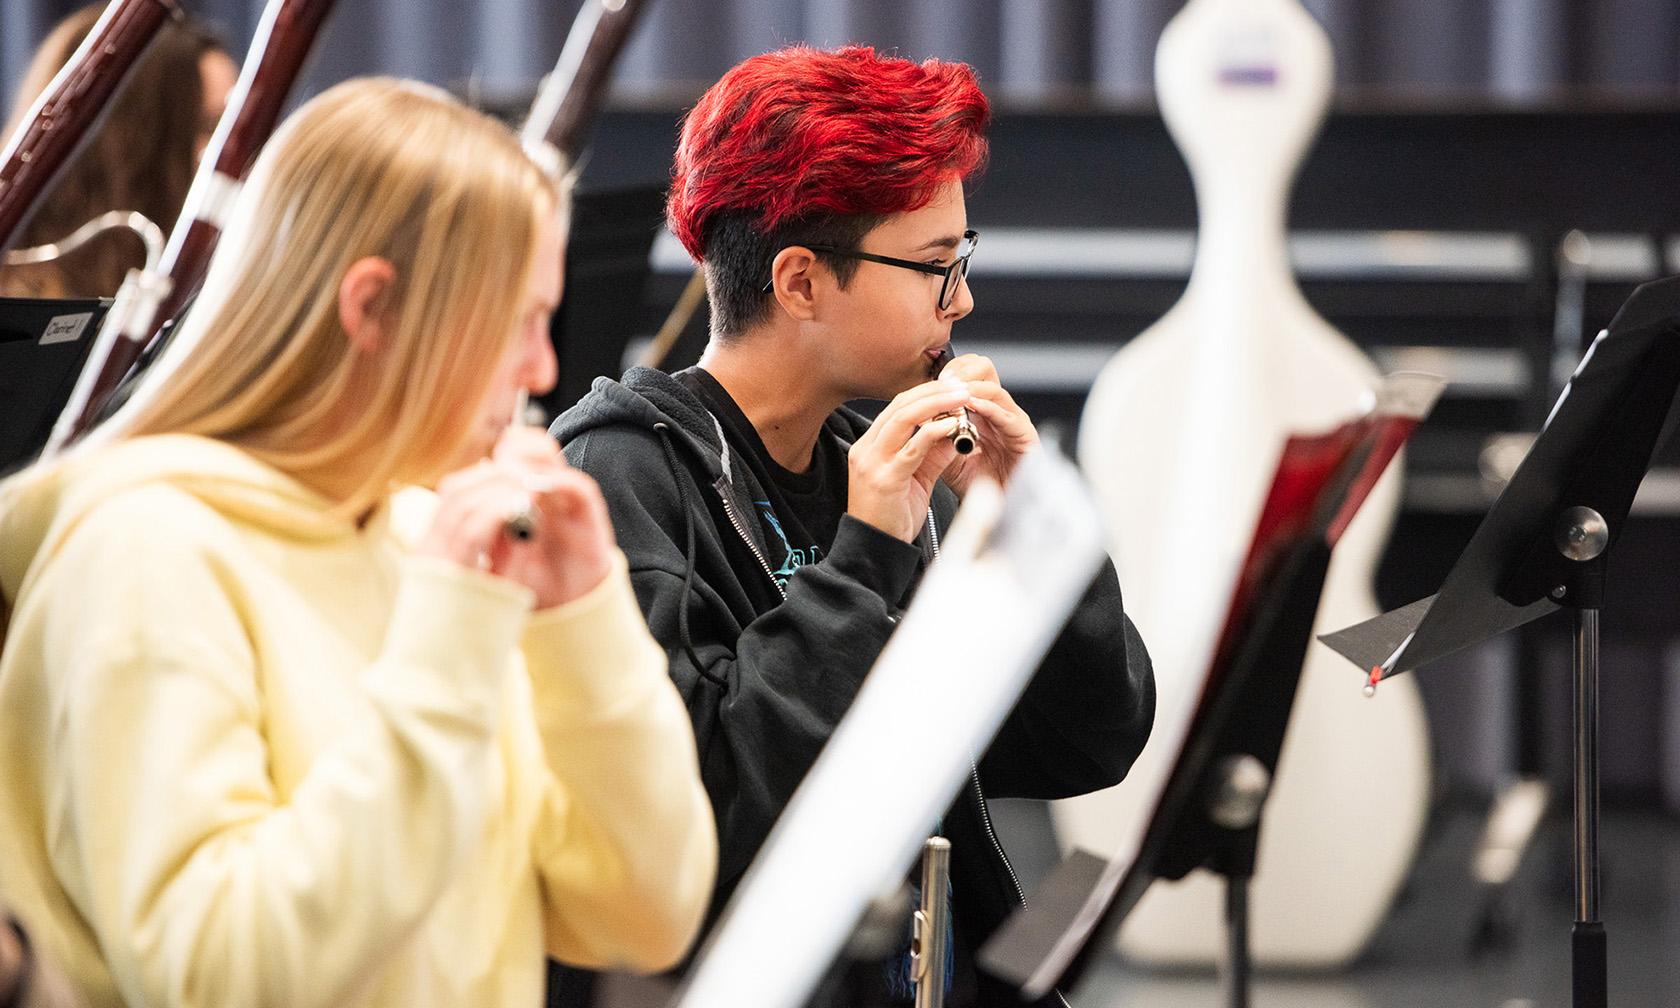 Student playing flute at band rehearsal